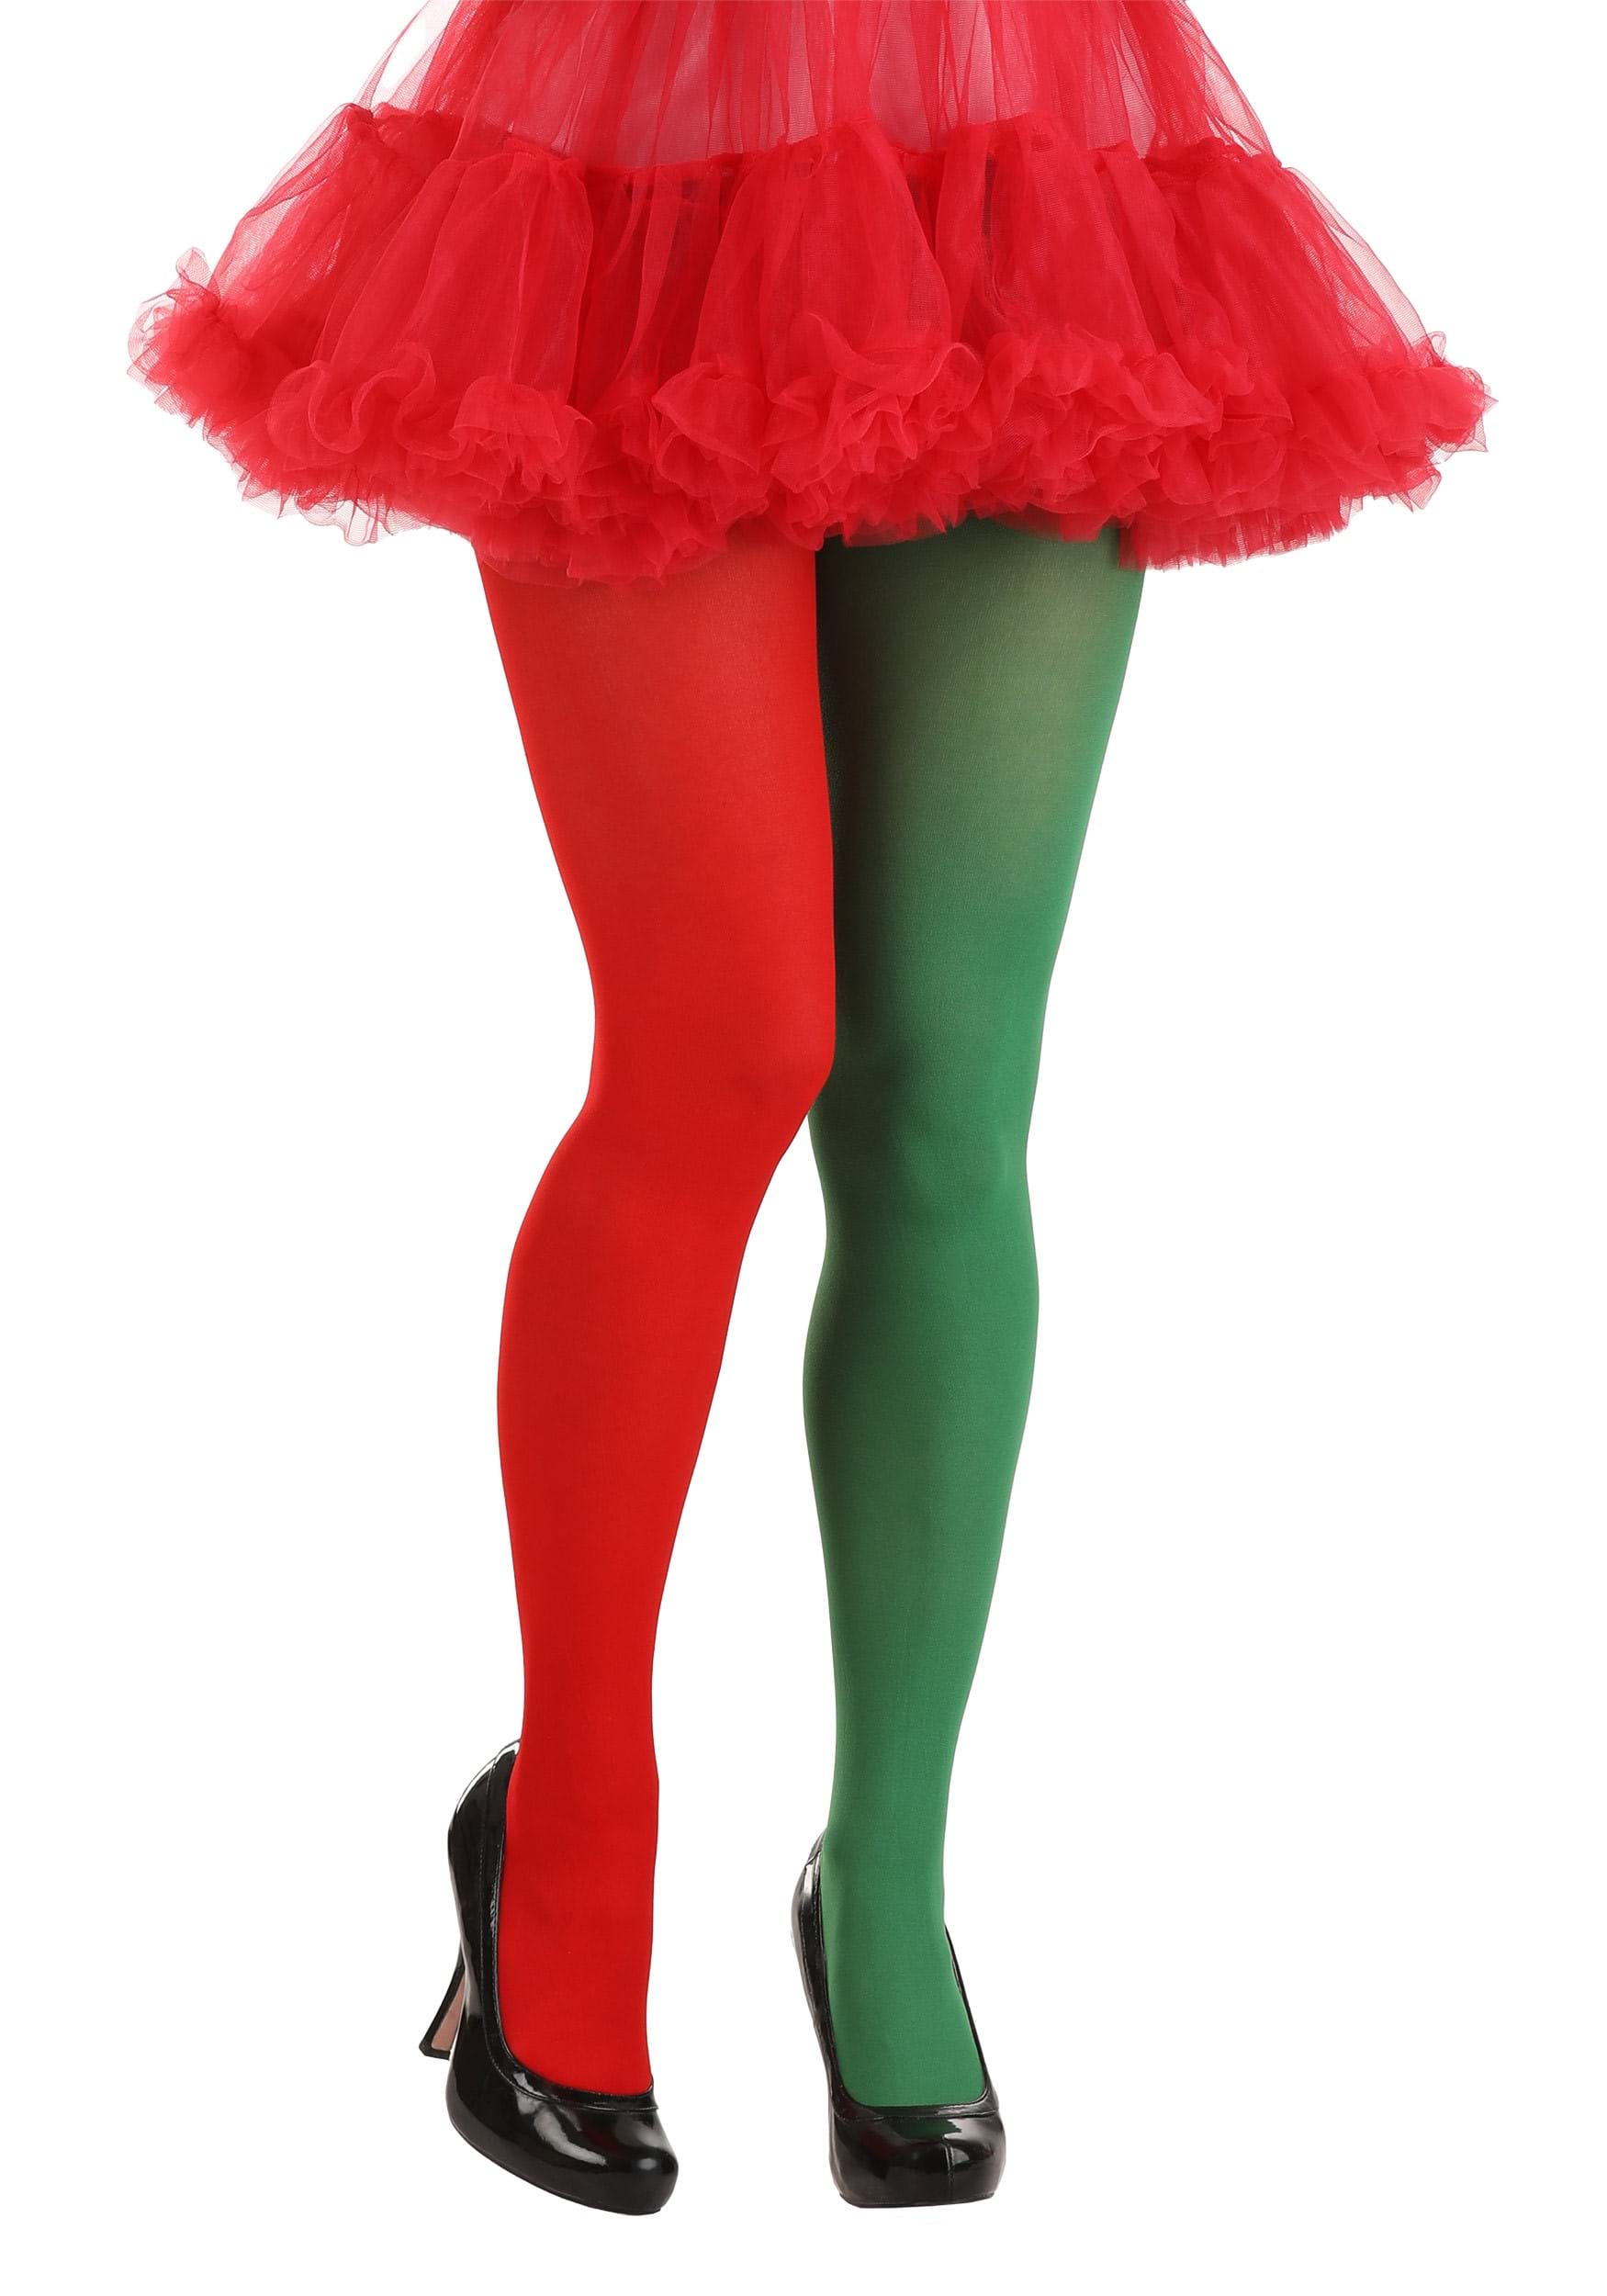 https://images.halloweencostumes.com/products/82270/1-1/womens-red-and-green-tights.jpg